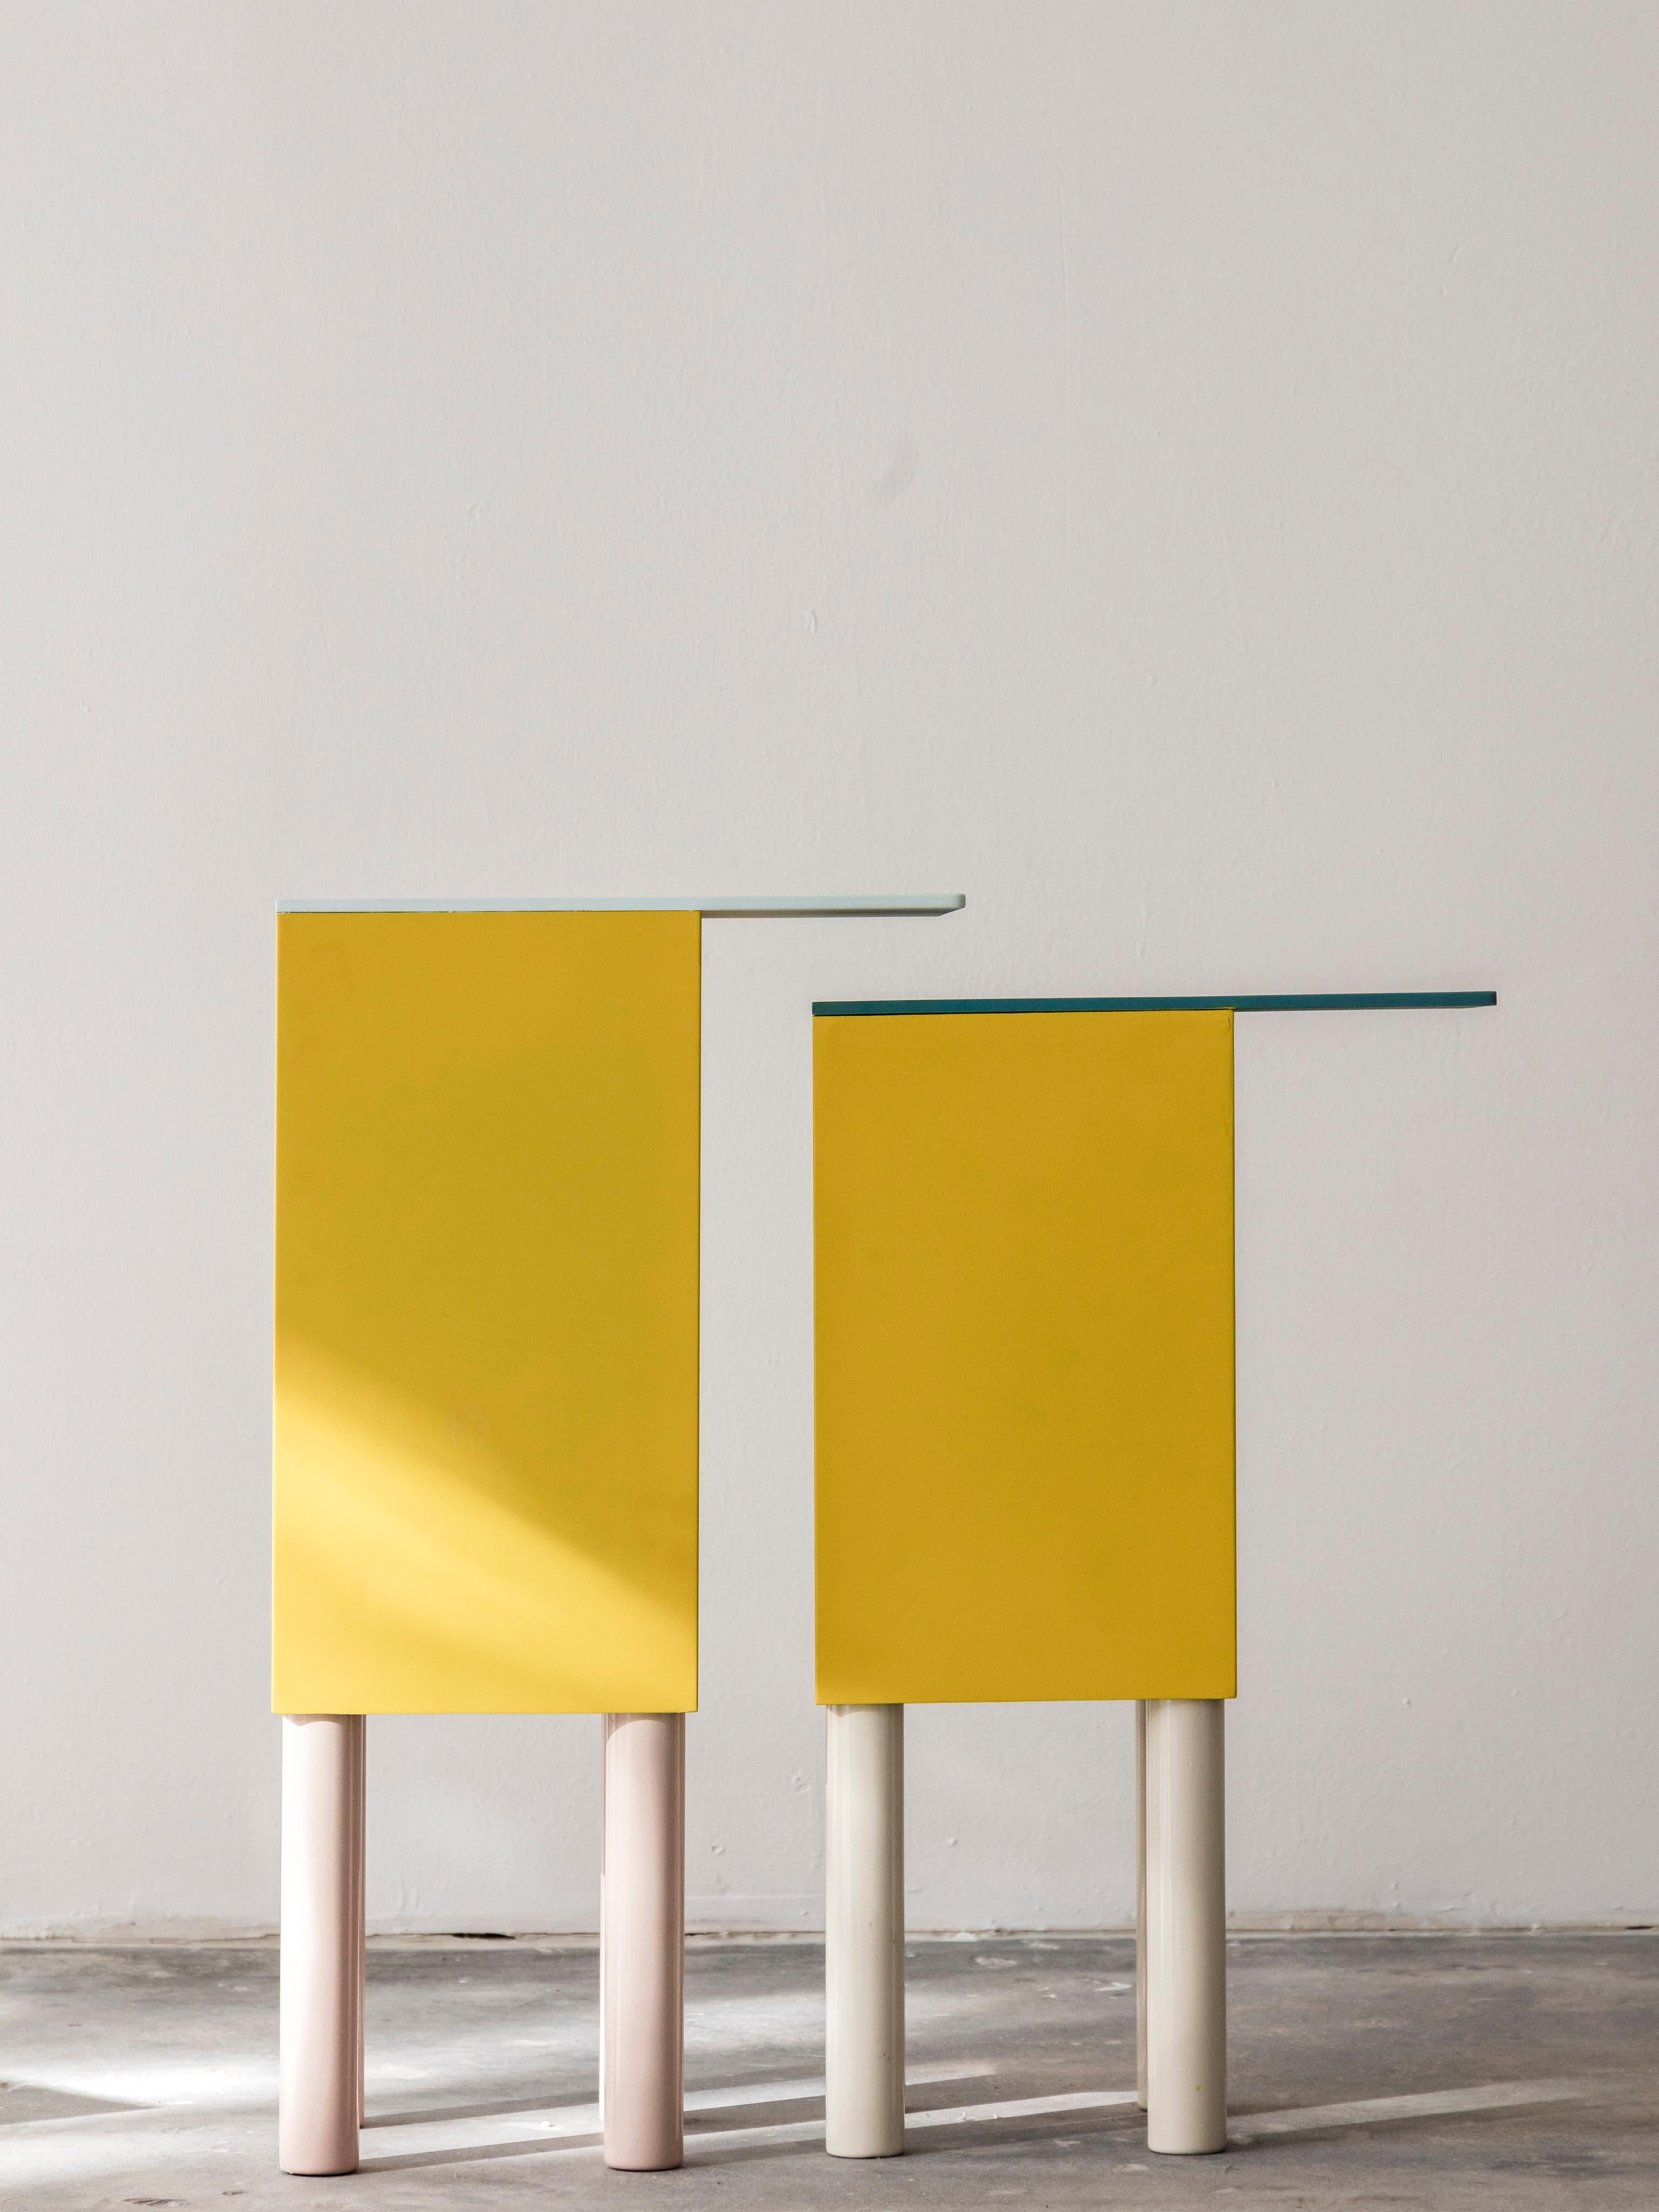 The nested bird like side tables are playful in both color and structure. The tables are made of powder coated aluminum in bright colors. 

